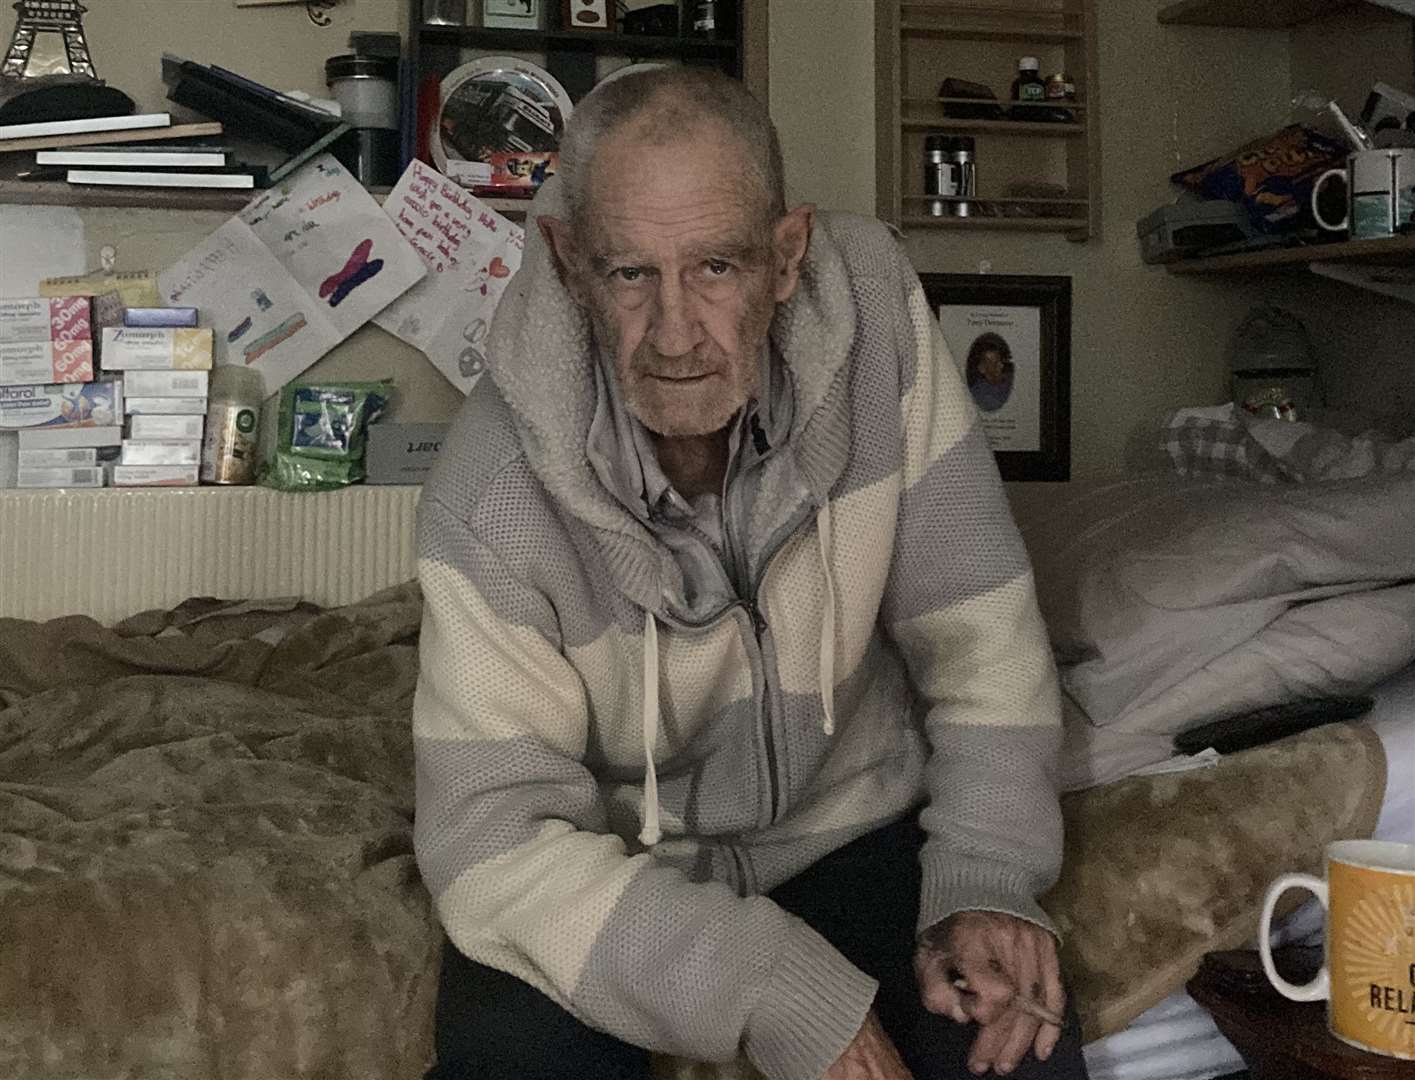 Terry Price in his Leopold Road home, where the burglary took place